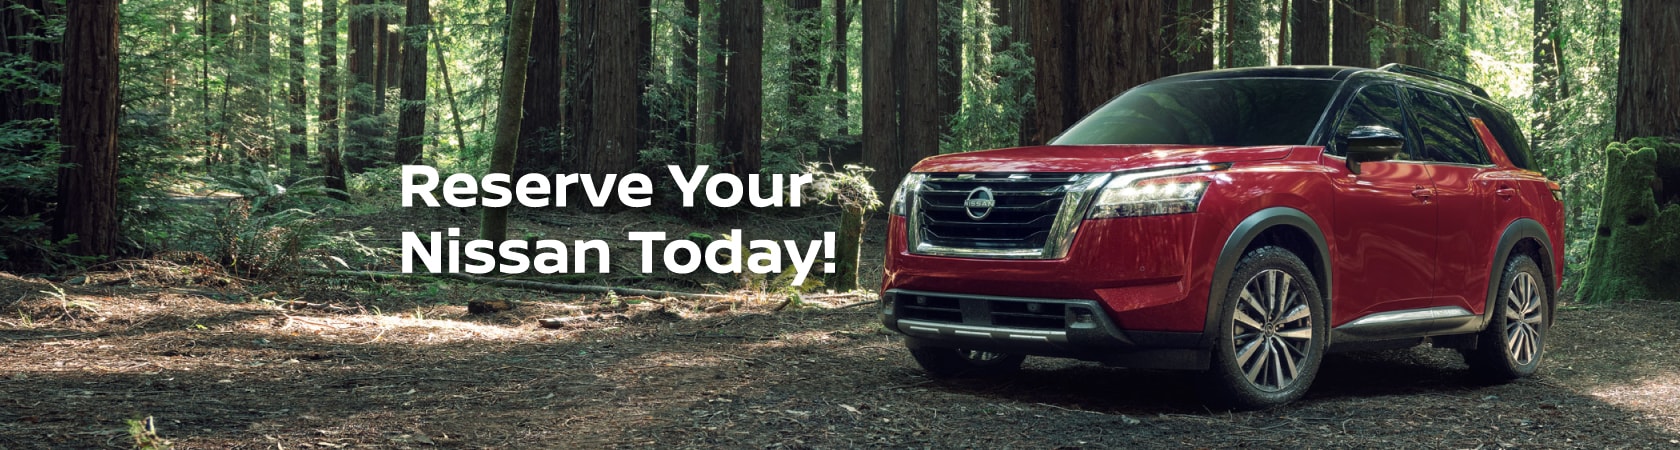 Reserve Your Nissan - Lithia Nissan of Eugene